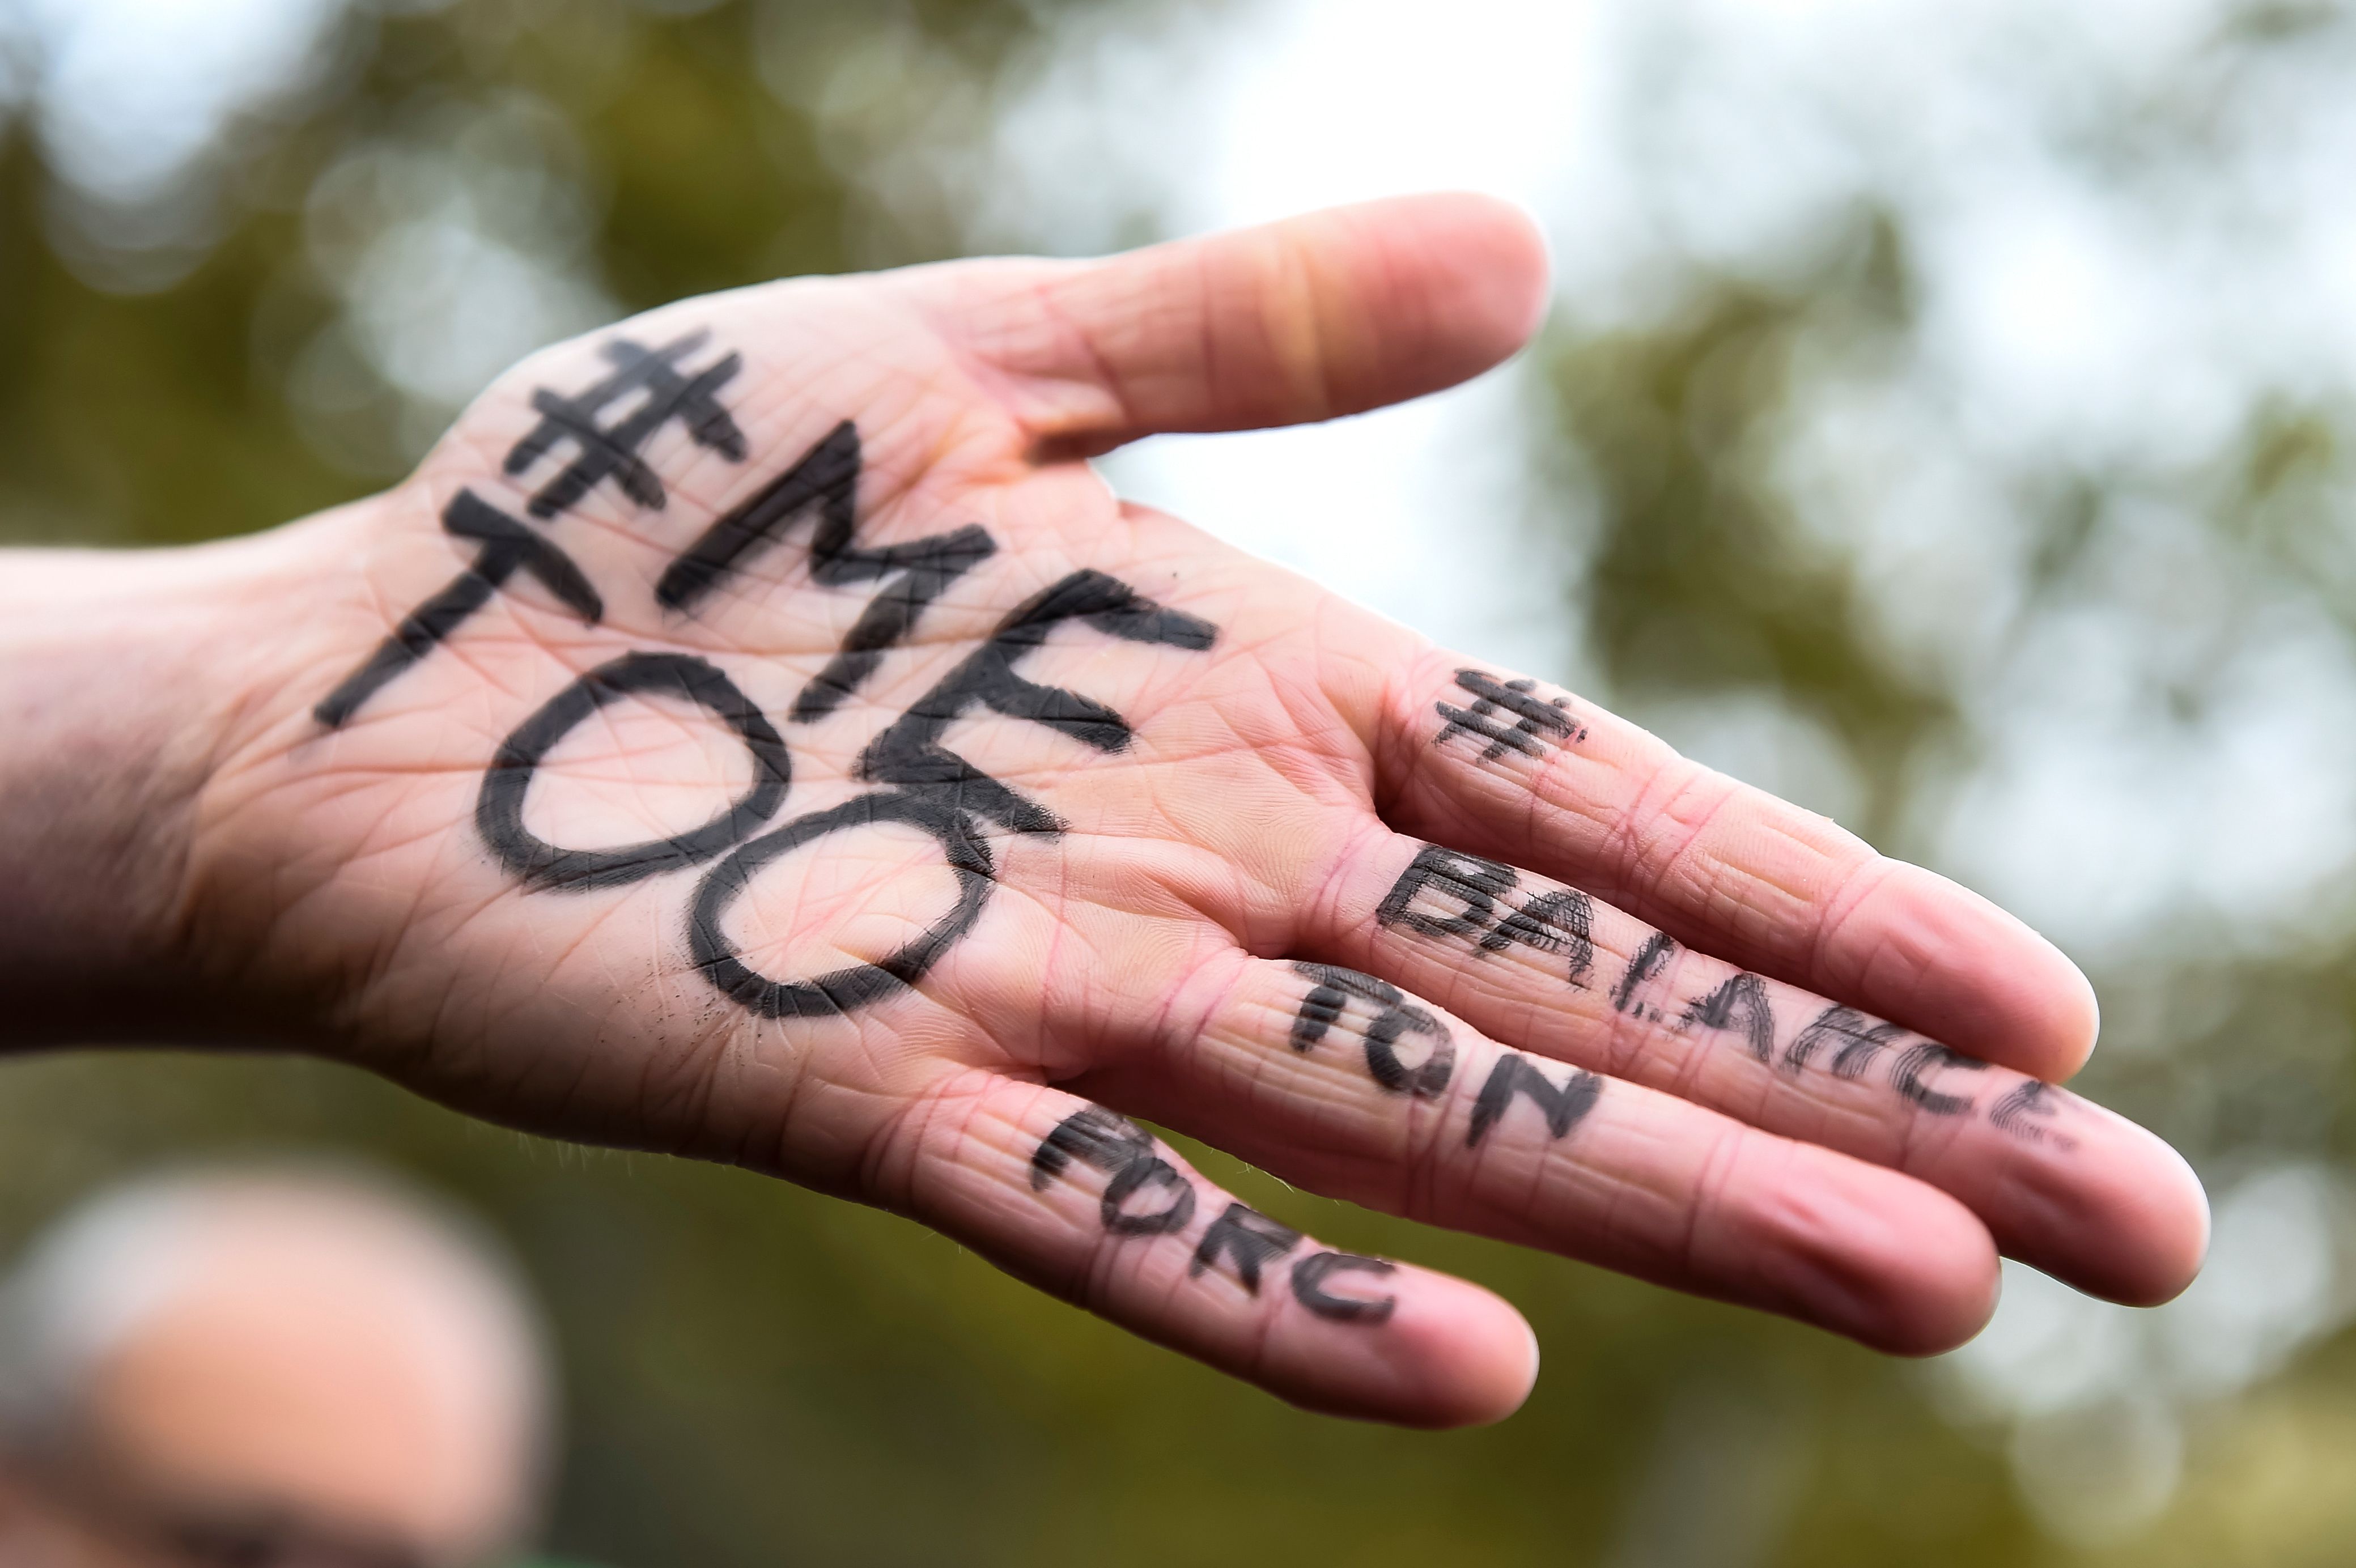 A picture shows the messages "#Me too" and #Balancetonporc ("expose your pig") on the hand of a protester during a gathering against gender-based and sexual violence called by the Effronte-e-s Collective, on the Place de la Republique square in Paris on October 29, 2017. #MeToo hashtag, is the campaign encouraging women to denounce experiences of sexual abuse that has swept across social media in the wake of the wave of allegations targeting Hollywood producer Harvey Weinstein. / AFP PHOTO / BERTRAND GUAY (Photo credit should read BERTRAND GUAY/AFP/Getty Images)